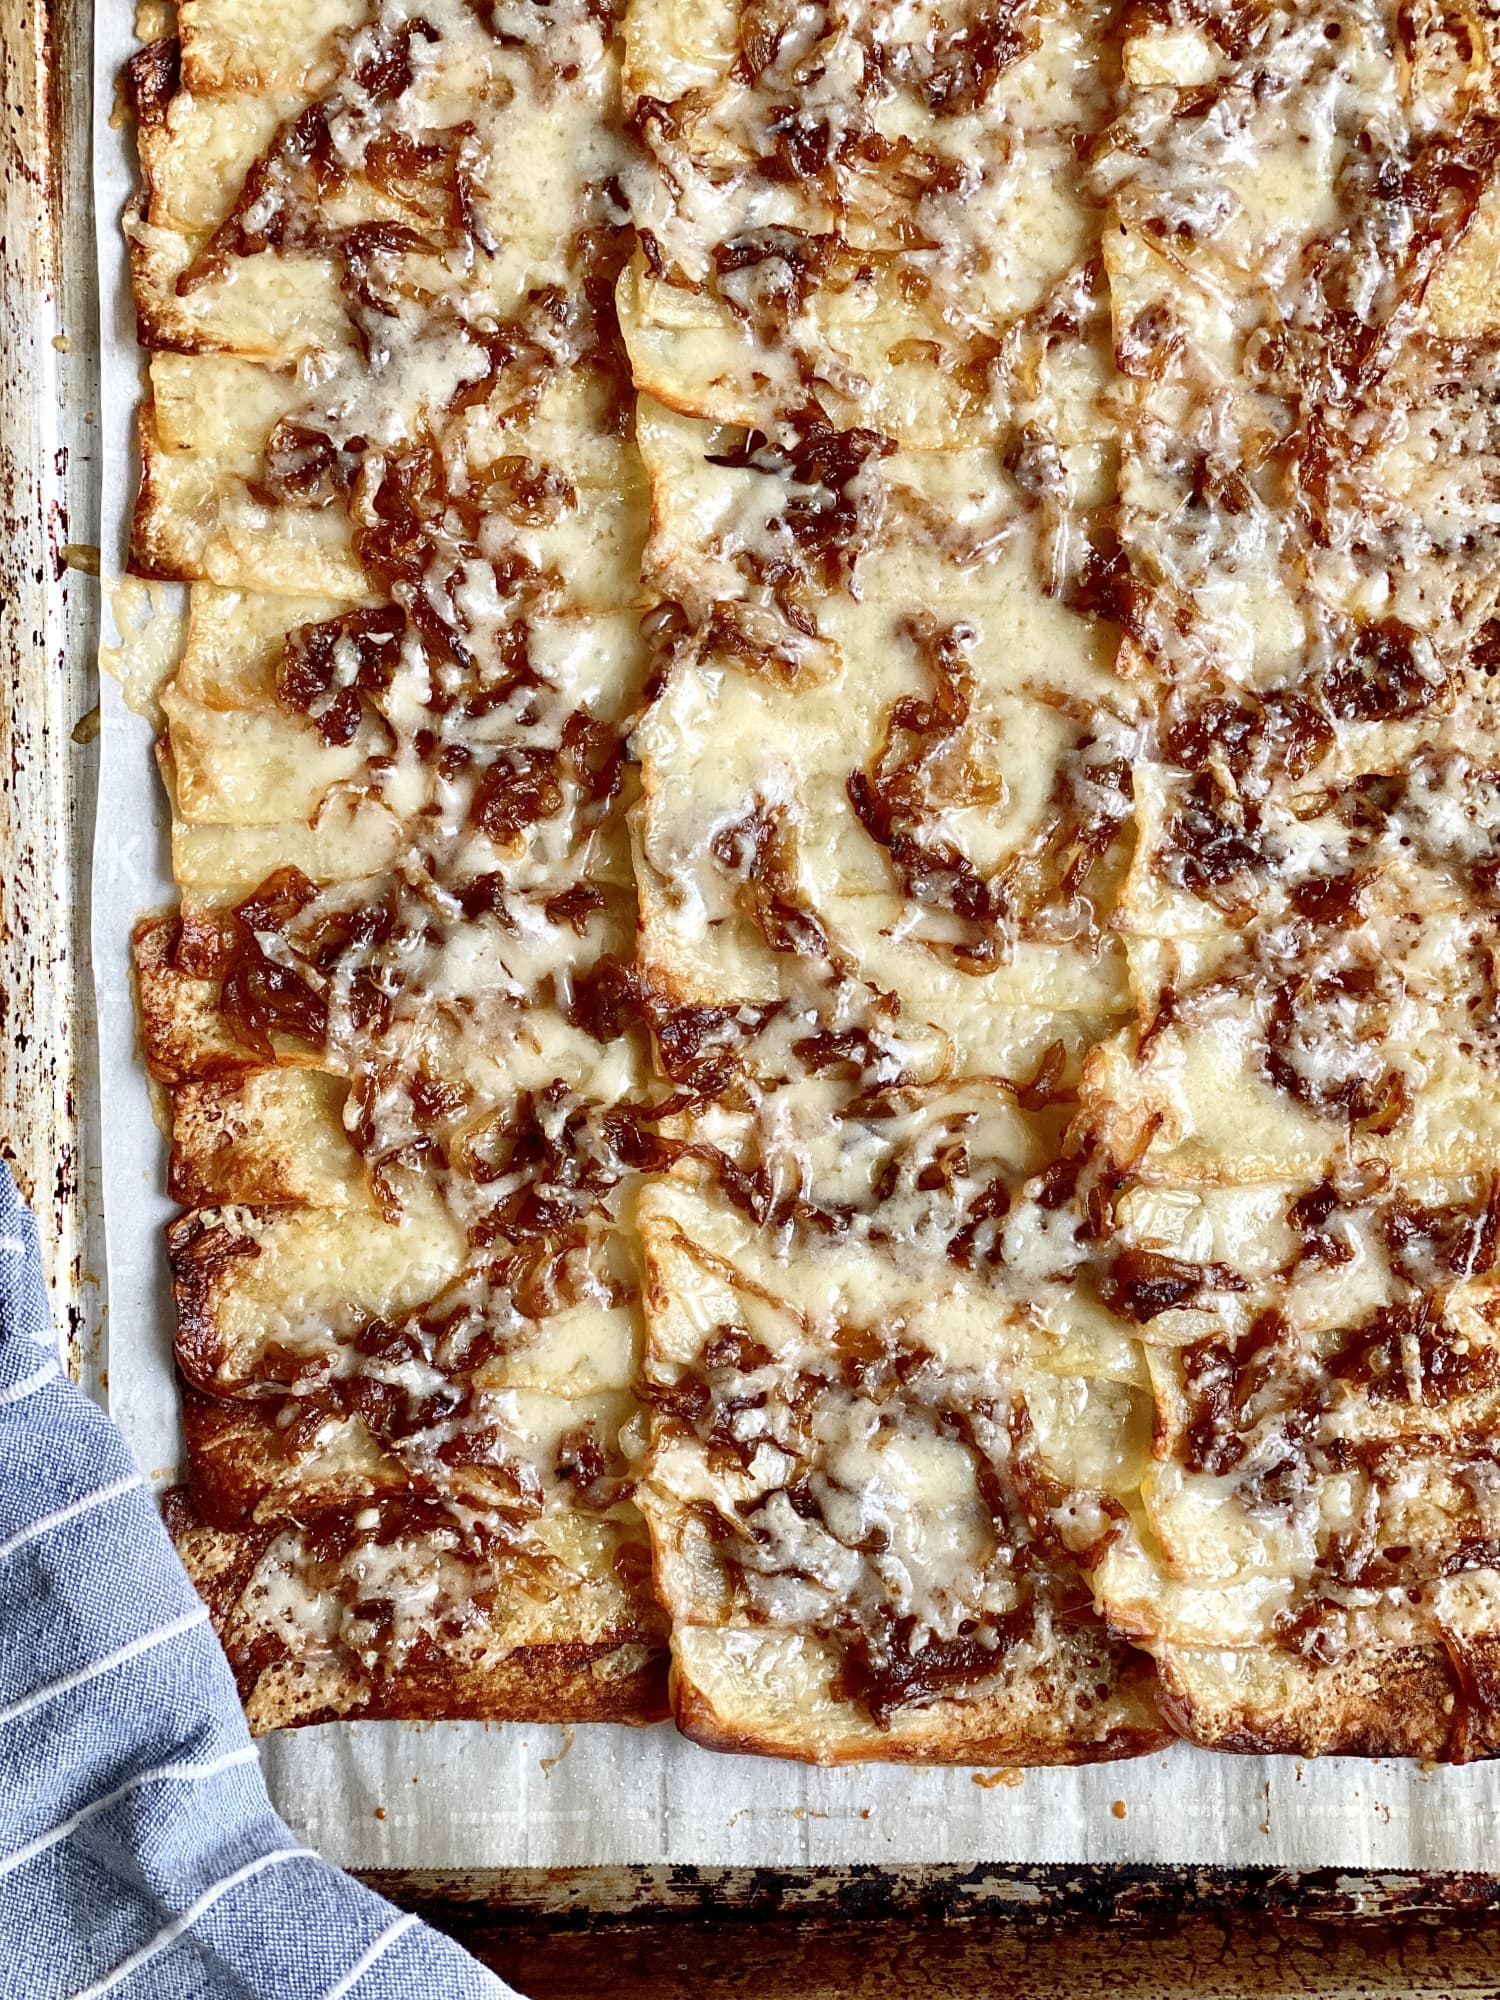 French Onion Domino Potatoes Are Crispy, Crunchy, Cheesy, and Practically Perfect